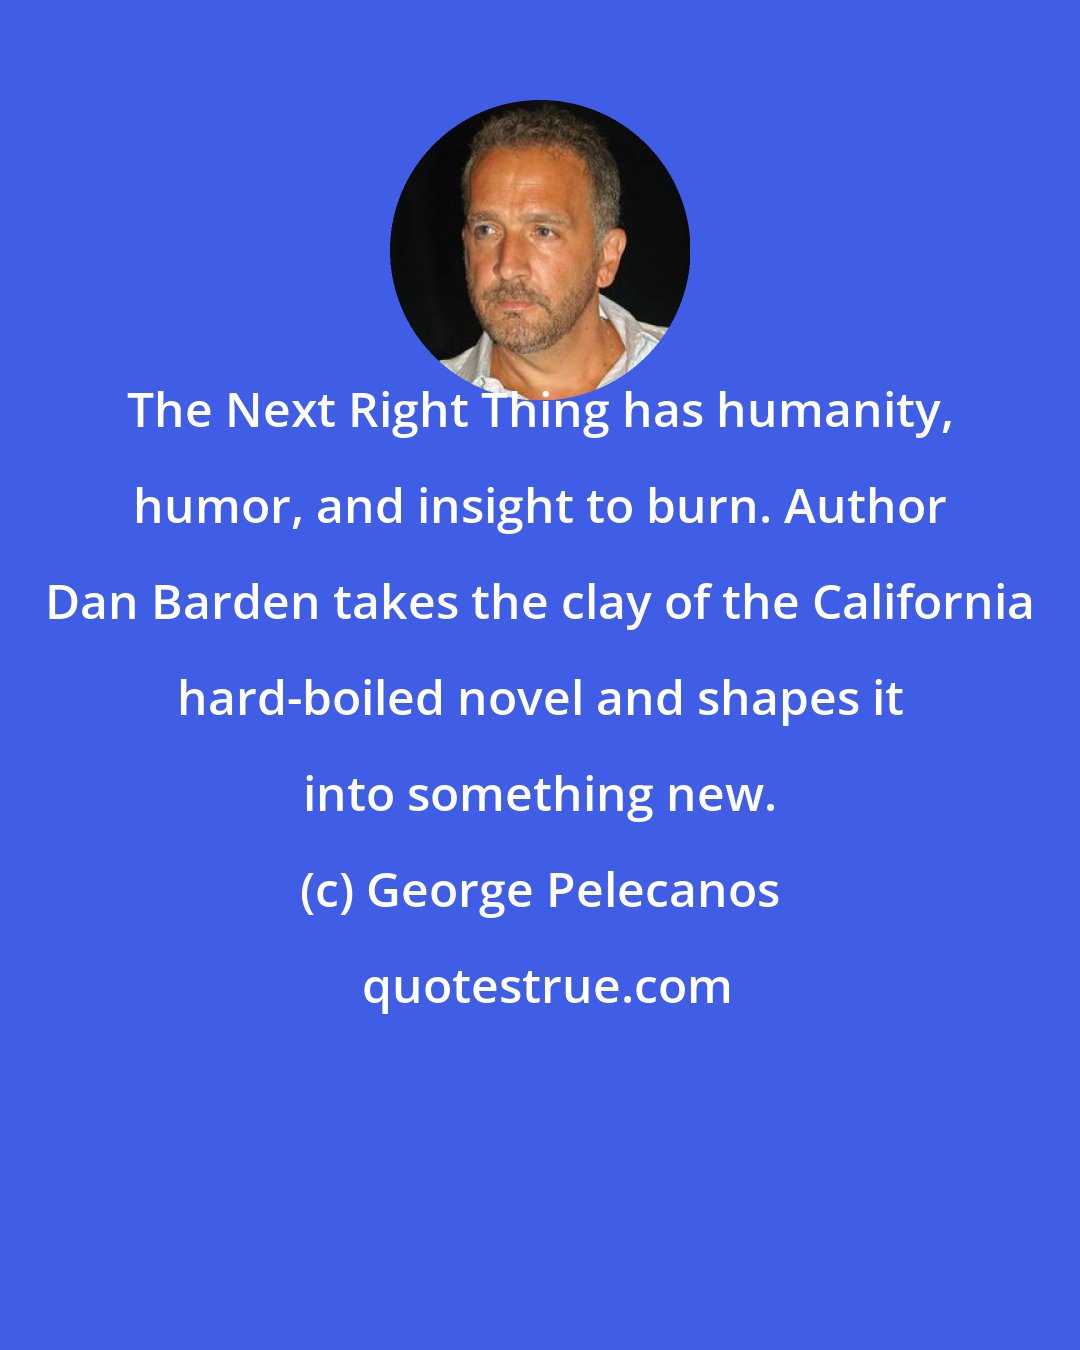 George Pelecanos: The Next Right Thing has humanity, humor, and insight to burn. Author Dan Barden takes the clay of the California hard-boiled novel and shapes it into something new.